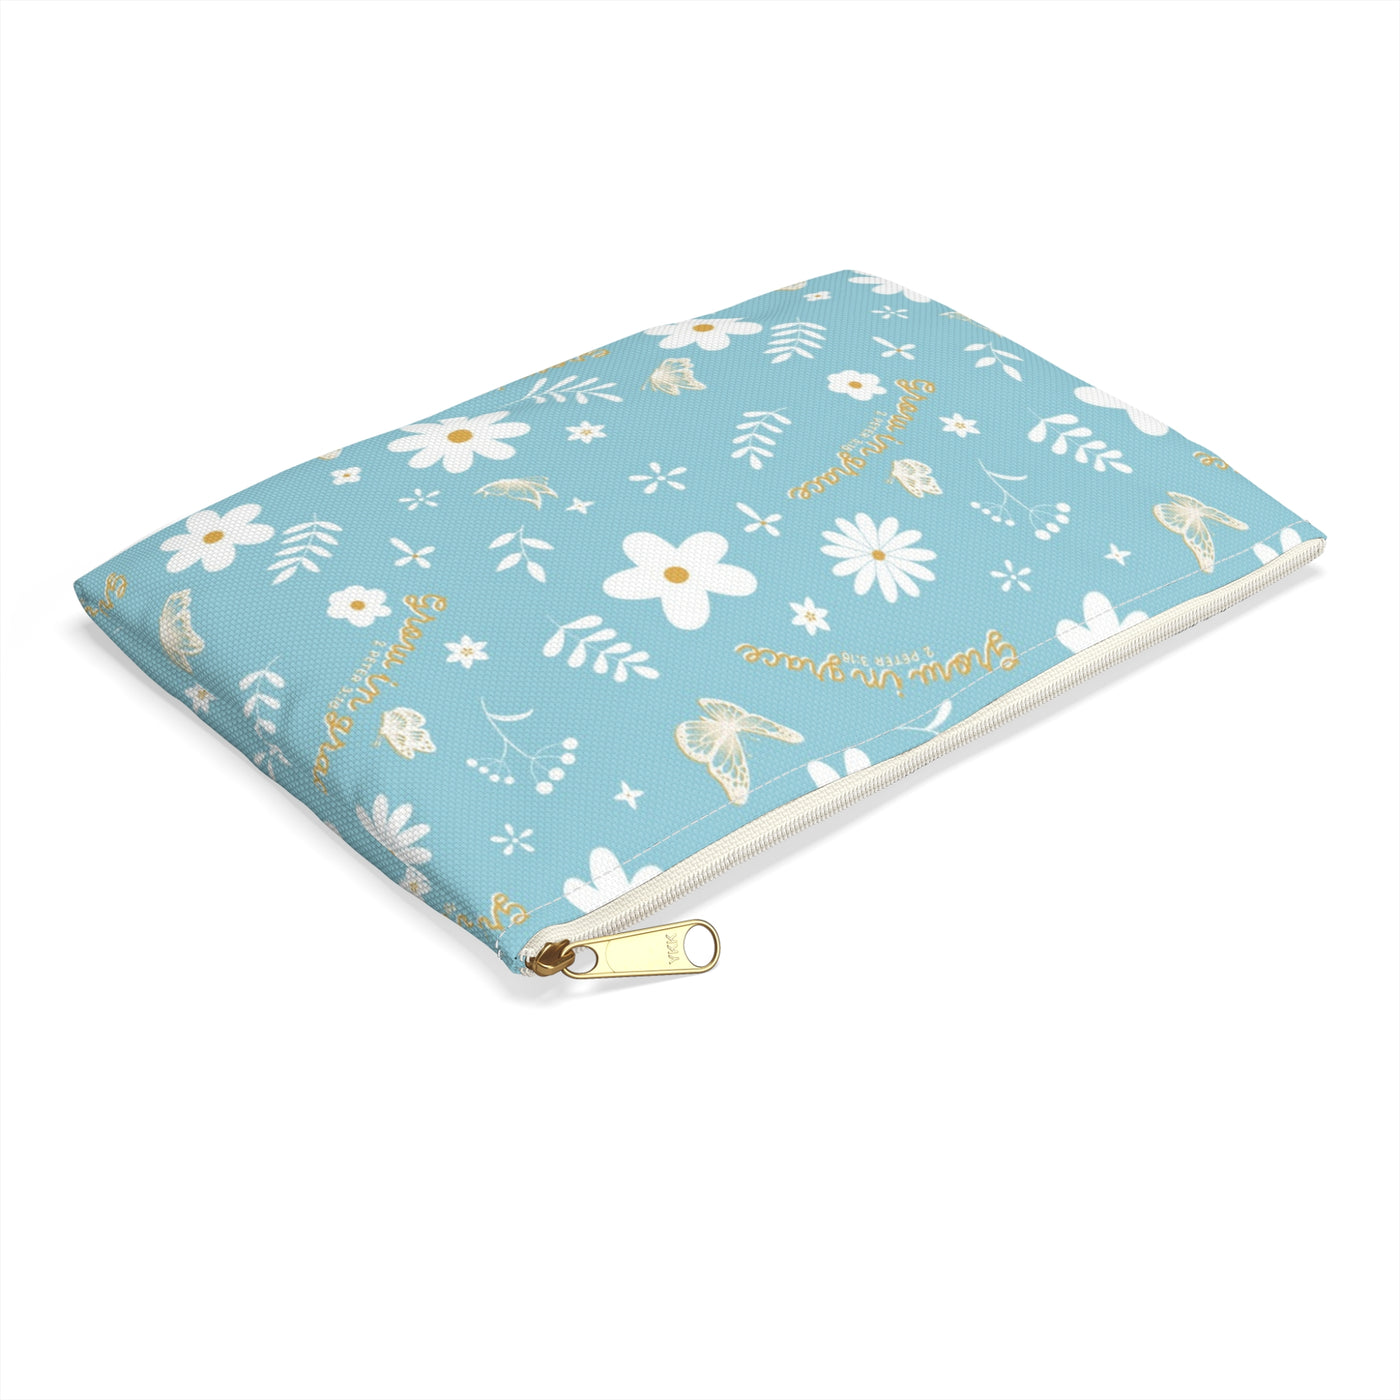 Grow in Grace Pencil Pouch